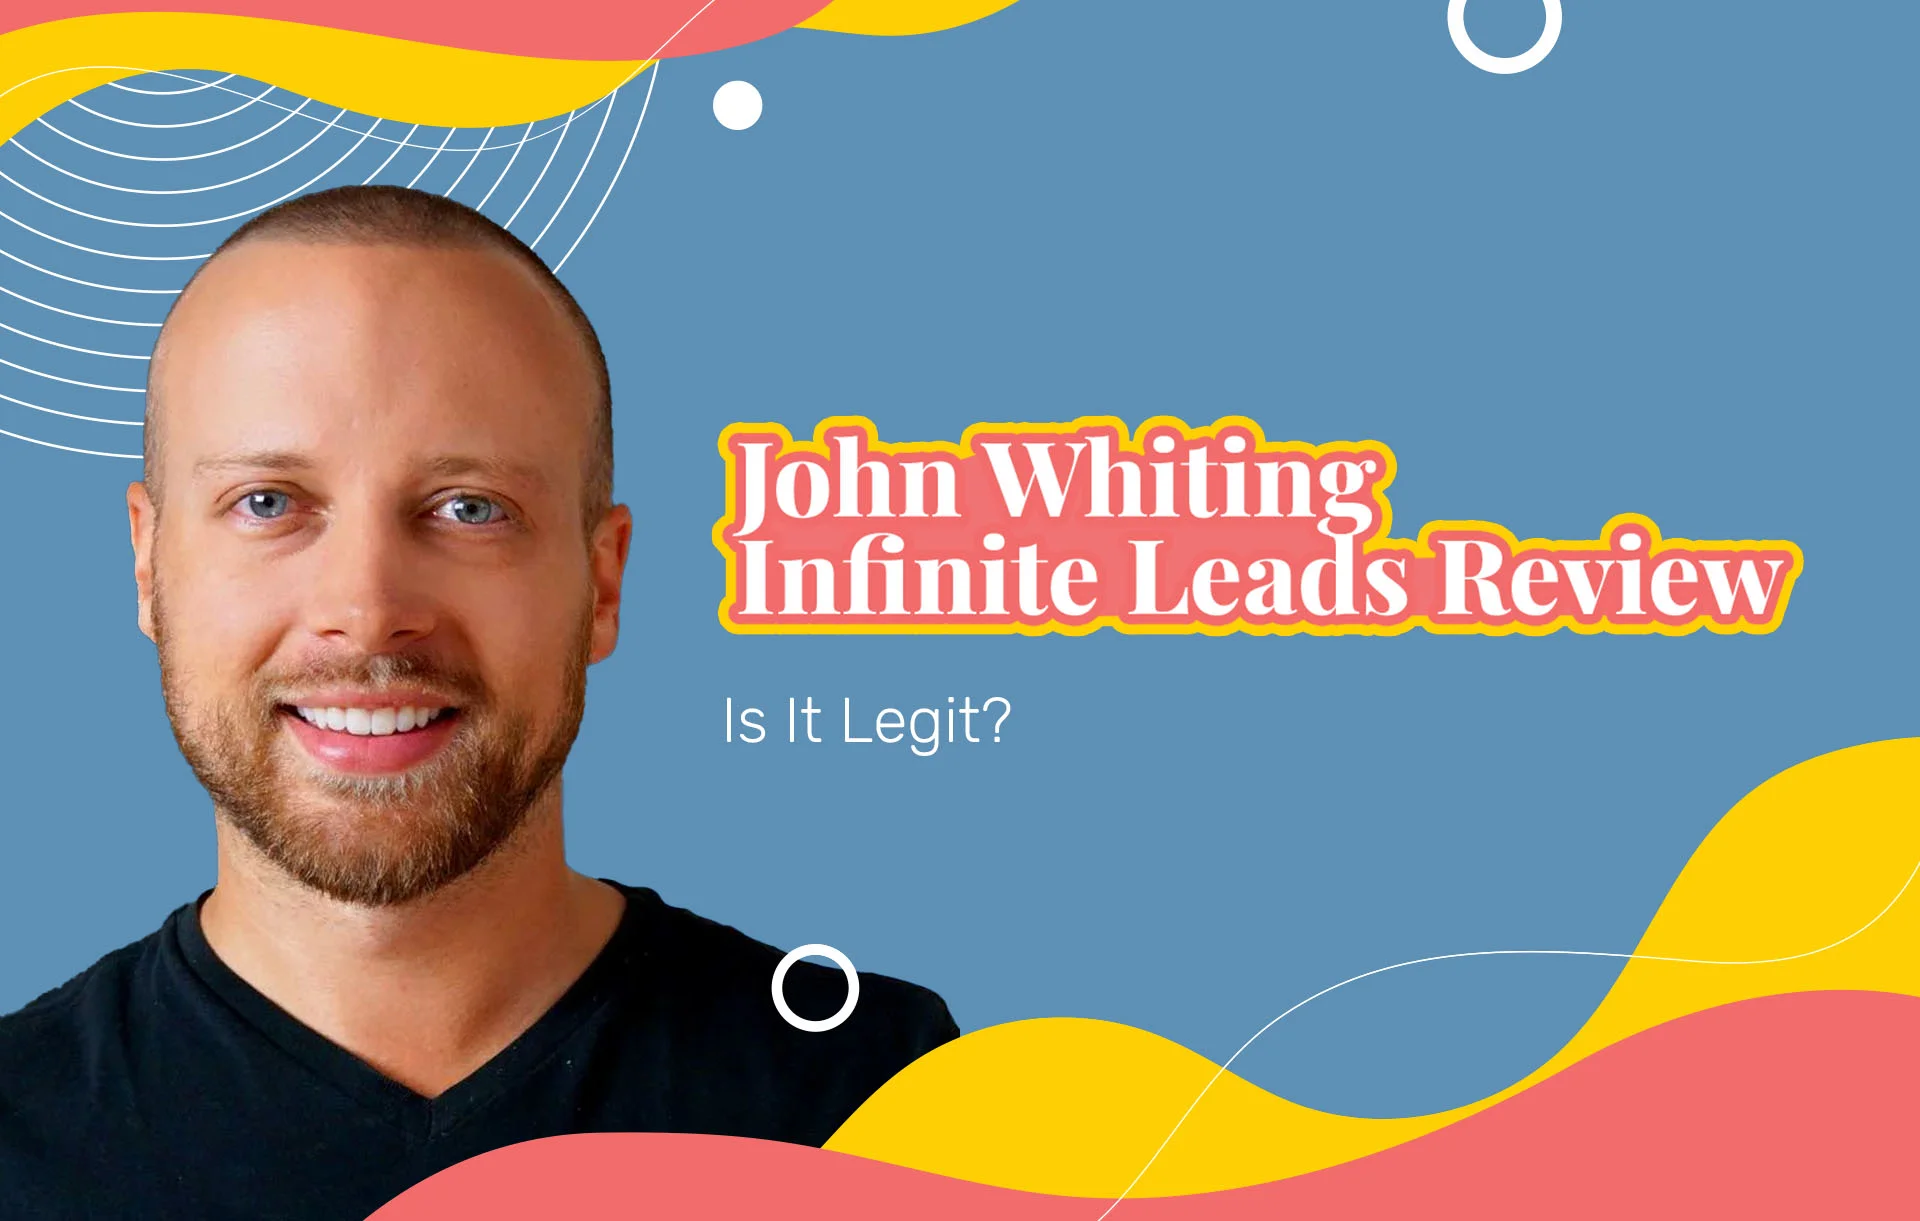 John Whiting Infinite Leads Review: Is It Legit?